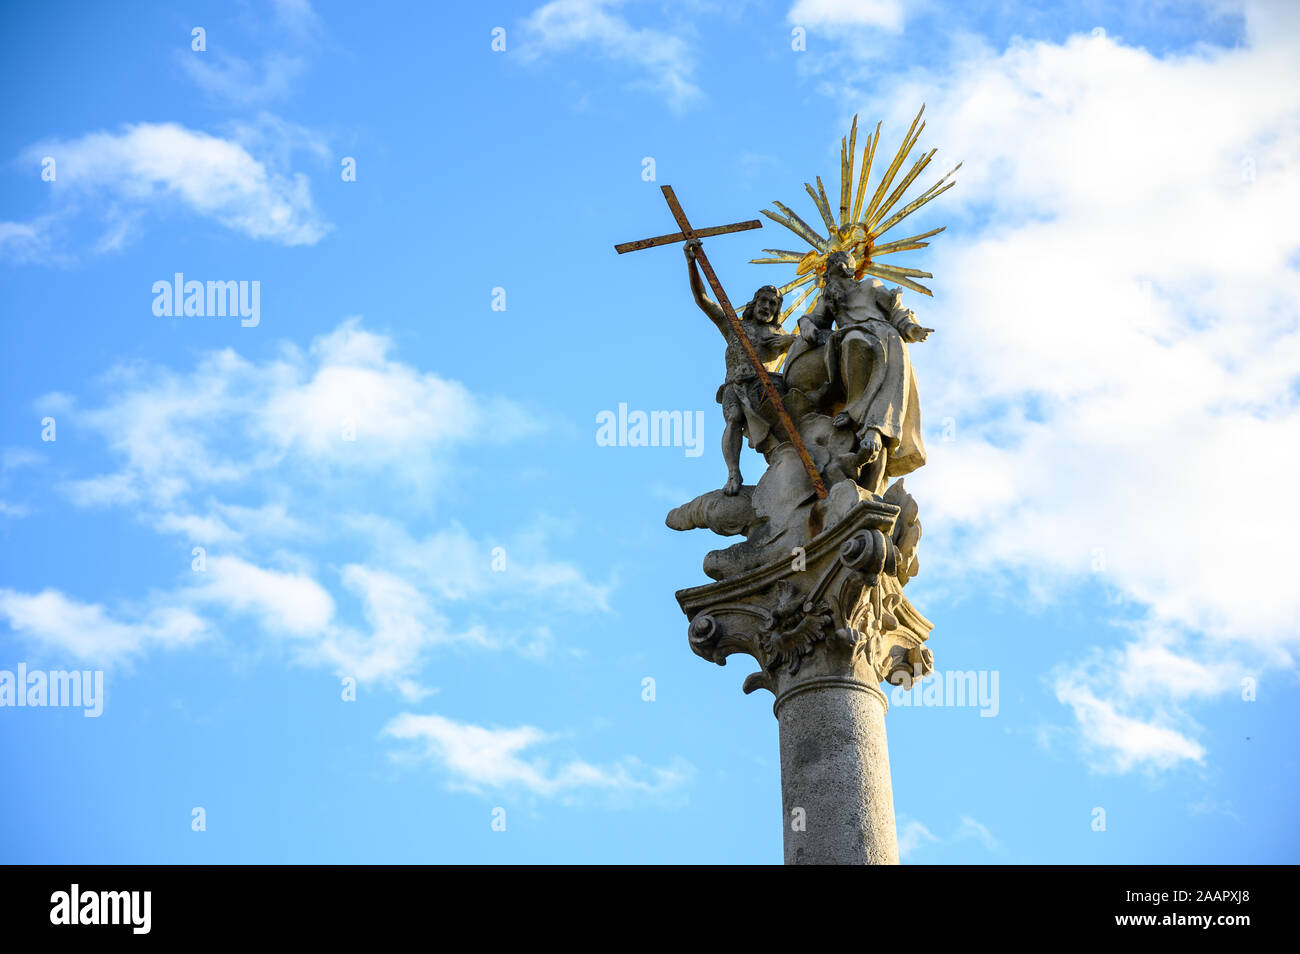 'Morovy stlp' (The Plague Column) from 1713 commemorating the end of the plague epidemic. The baroque column depicting the Holy Trinity. Stock Photo